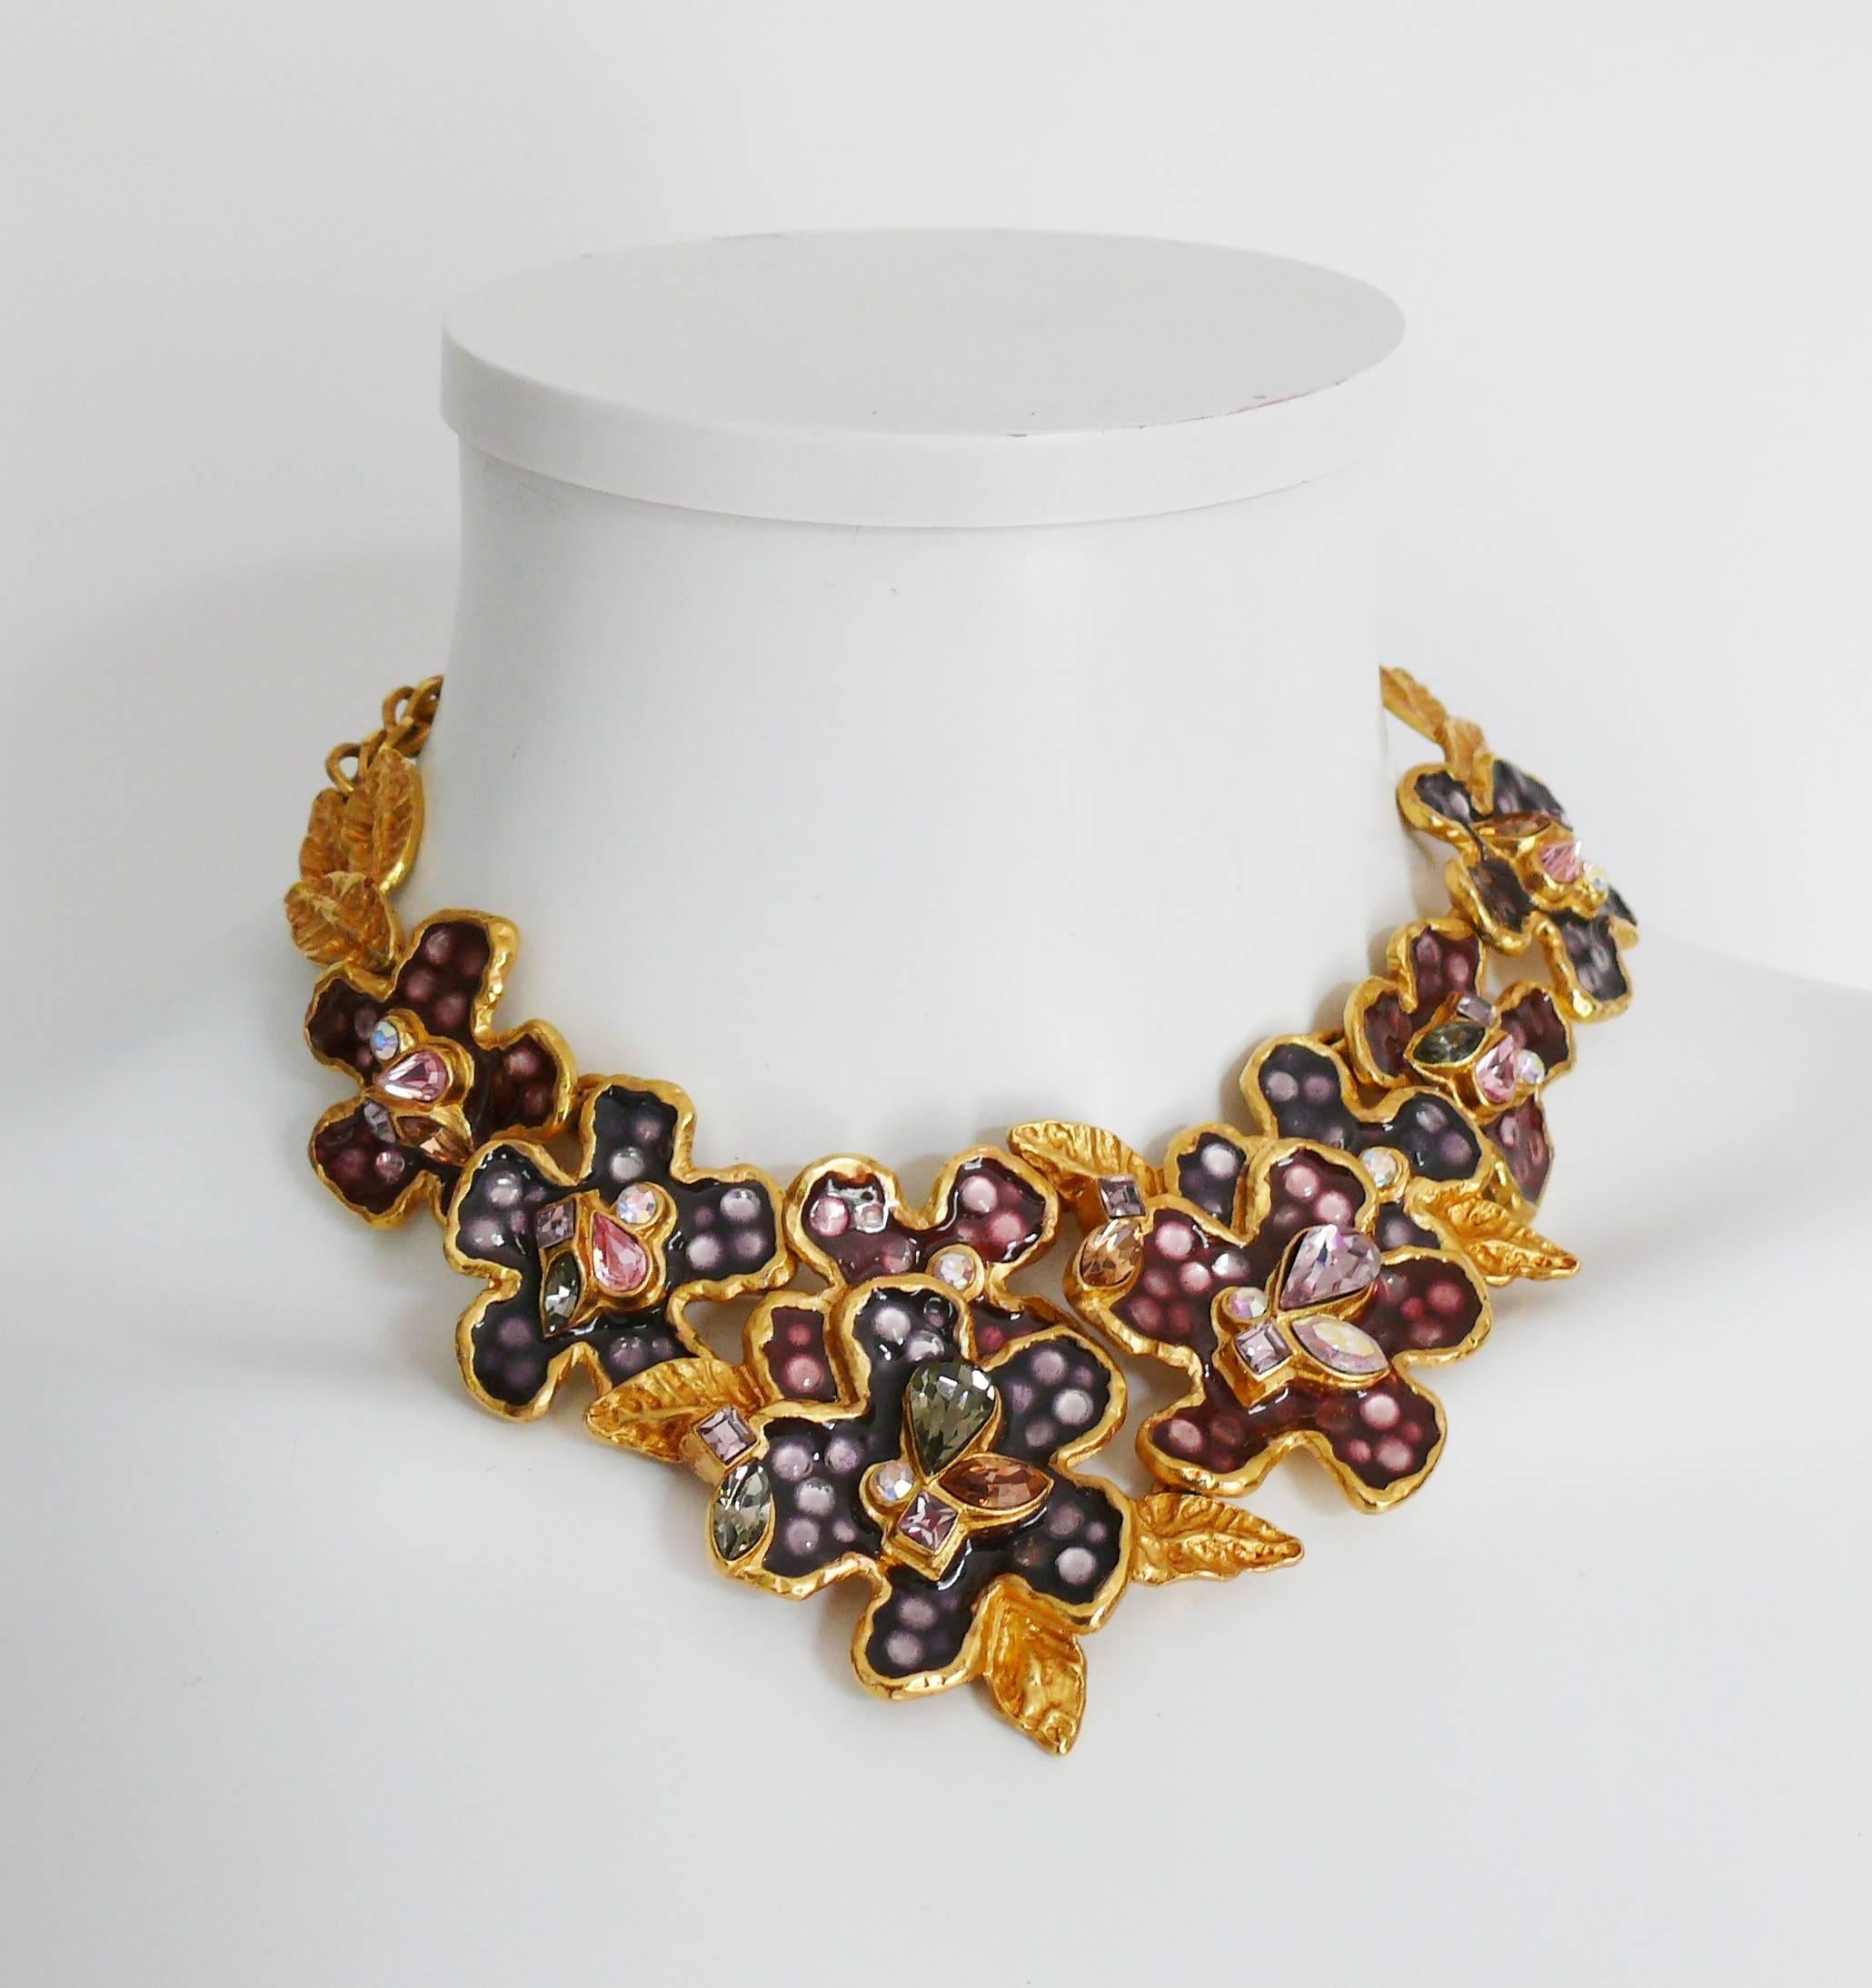 CHRISTIAN LACROIX gorgeous vintage gold toned necklace featuring enameled flowers with multicolor crystal embellishement.

Hook clasp closure.
Extension chain.

Marked CHRISTIAN LACROIX CL Made in France.
CL monogram hanging charm.

Indicative